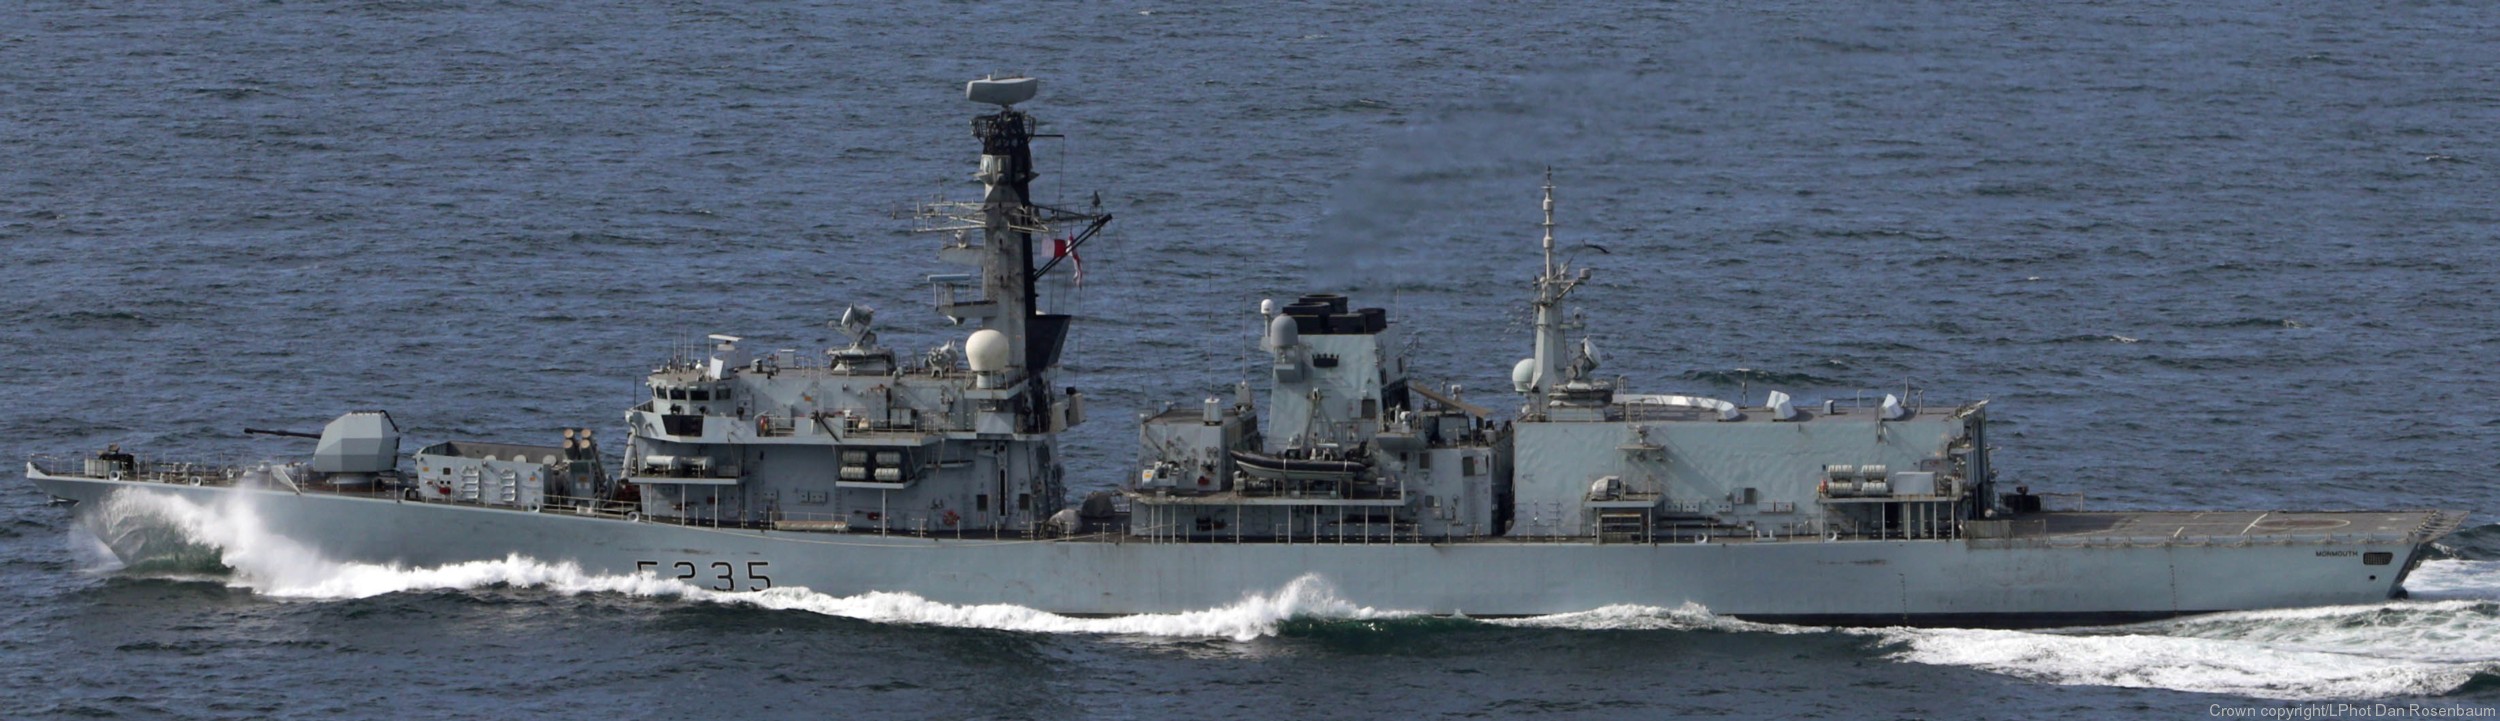 f-235 hms monmouth type 23 duke class guided missile frigate ffg royal navy 30